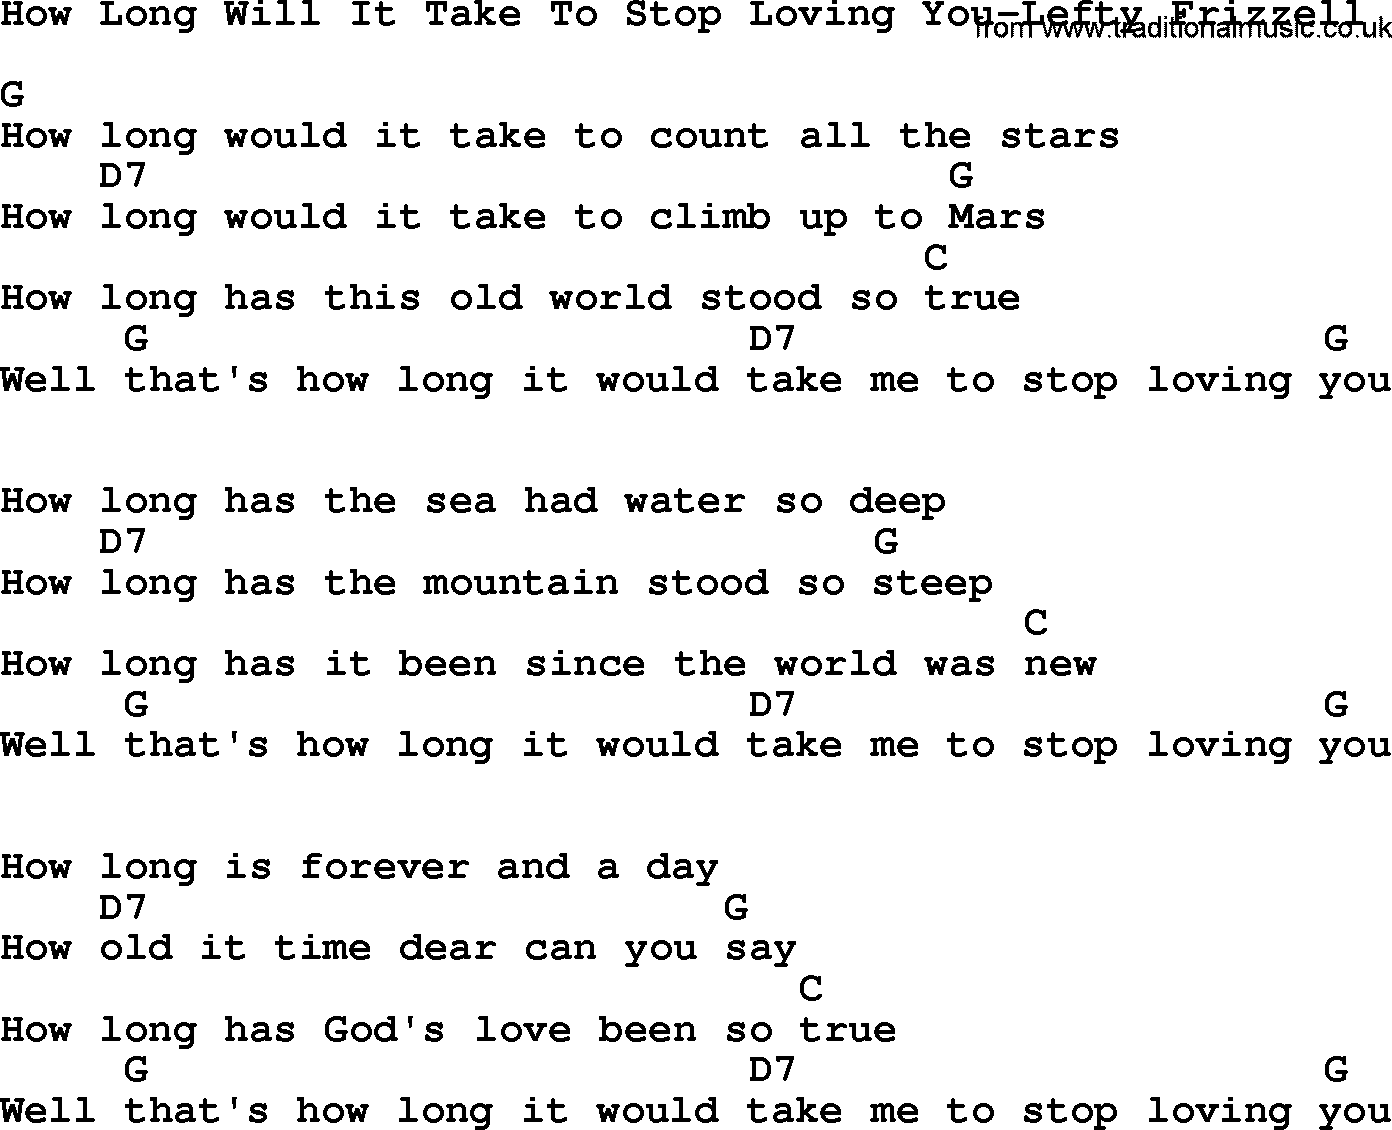 Country music song: How Long Will It Take To Stop Loving You-Lefty Frizzell lyrics and chords